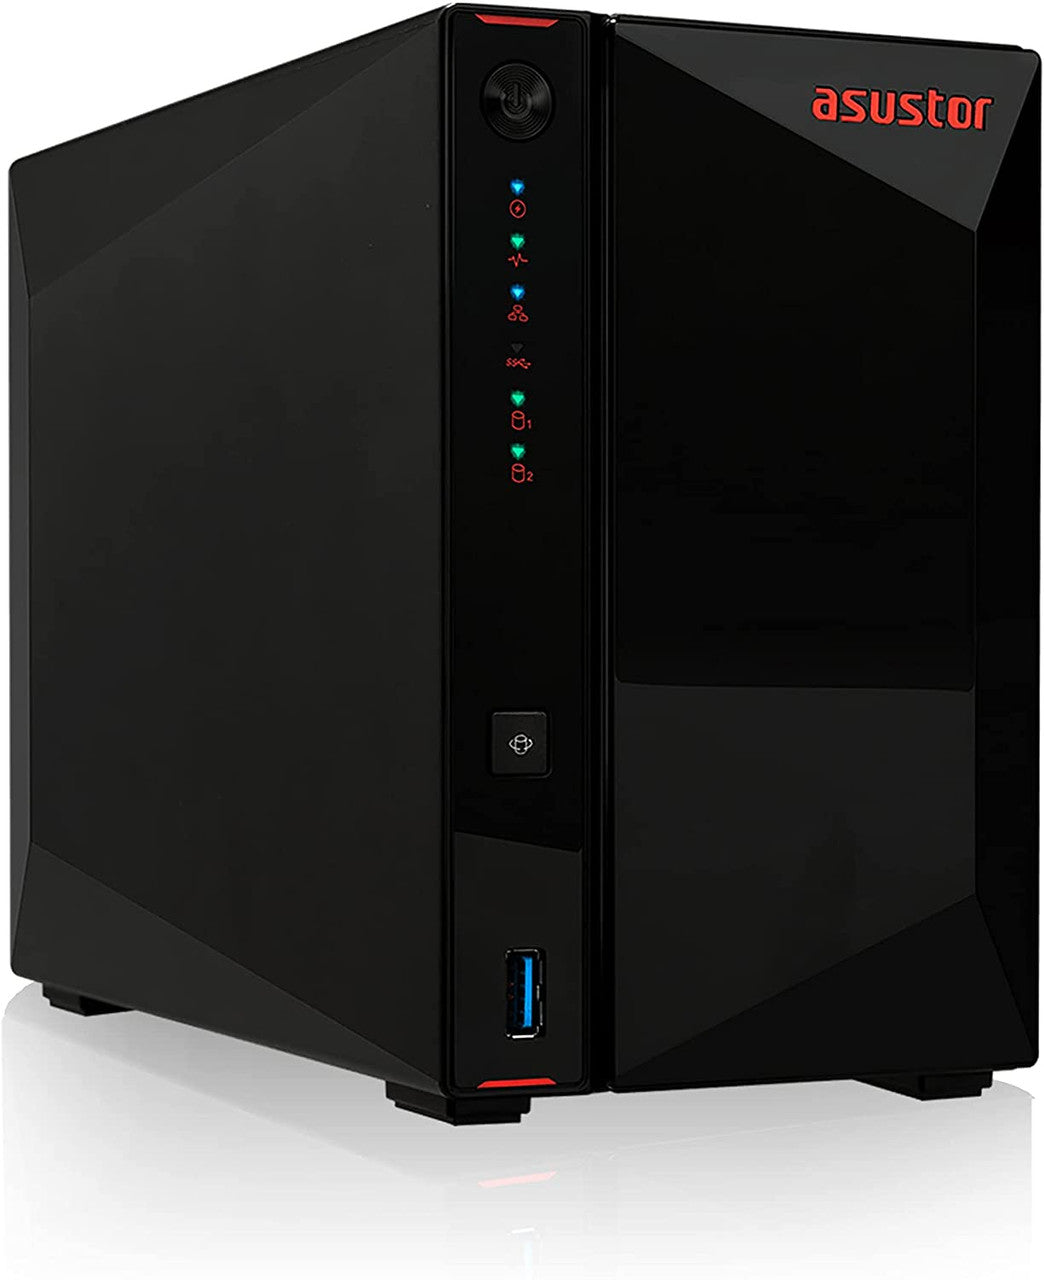 Asustor AS5202T 2-Bay Nimbustor 2 NAS with 8GB RAM and 20TB (2 x 10TB) Seagate Ironwolf PRO Drives Fully Assembled and Tested